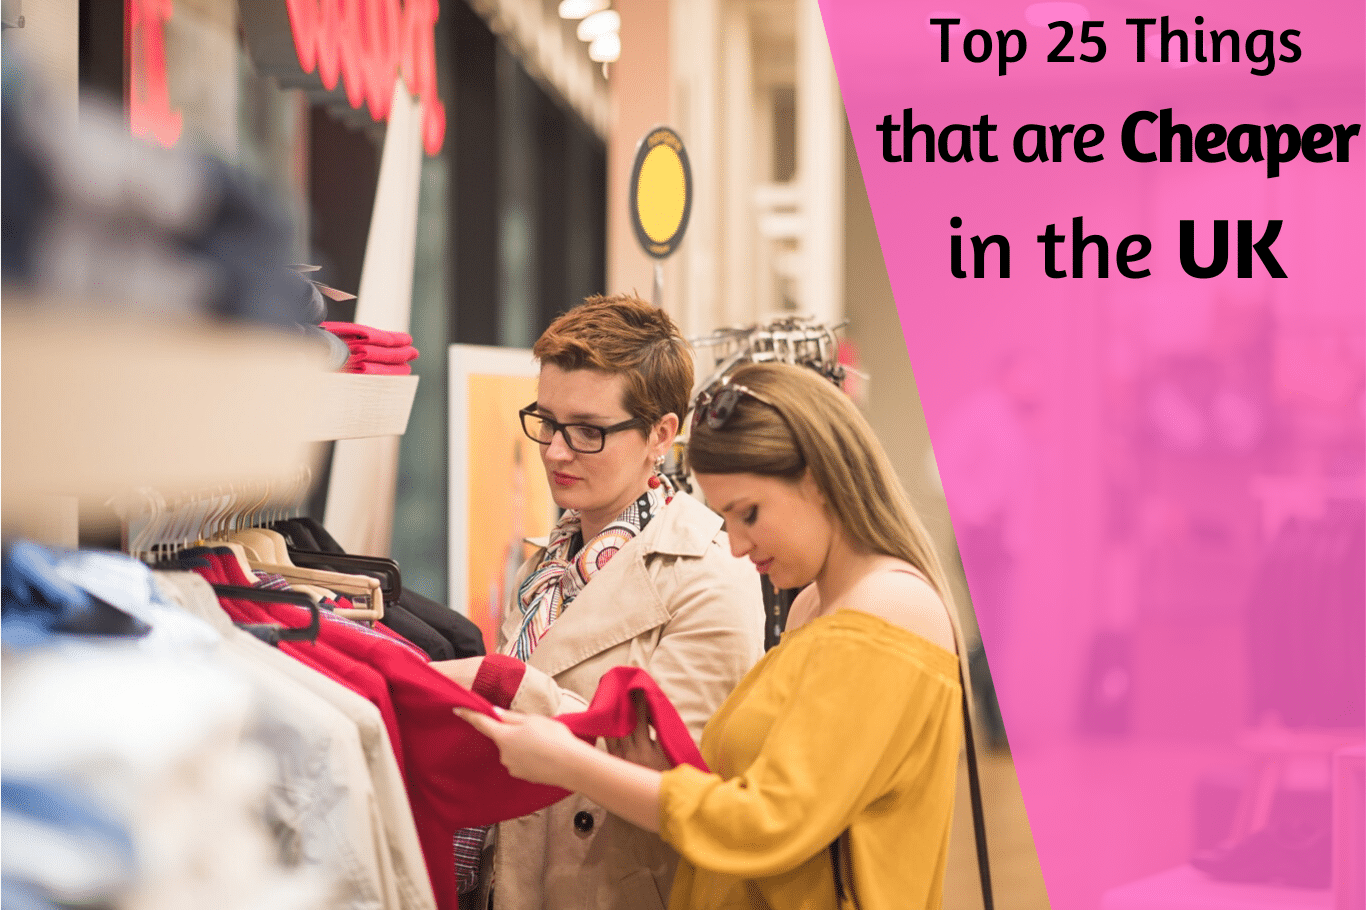 Top 25 Things that are Cheaper in the UK